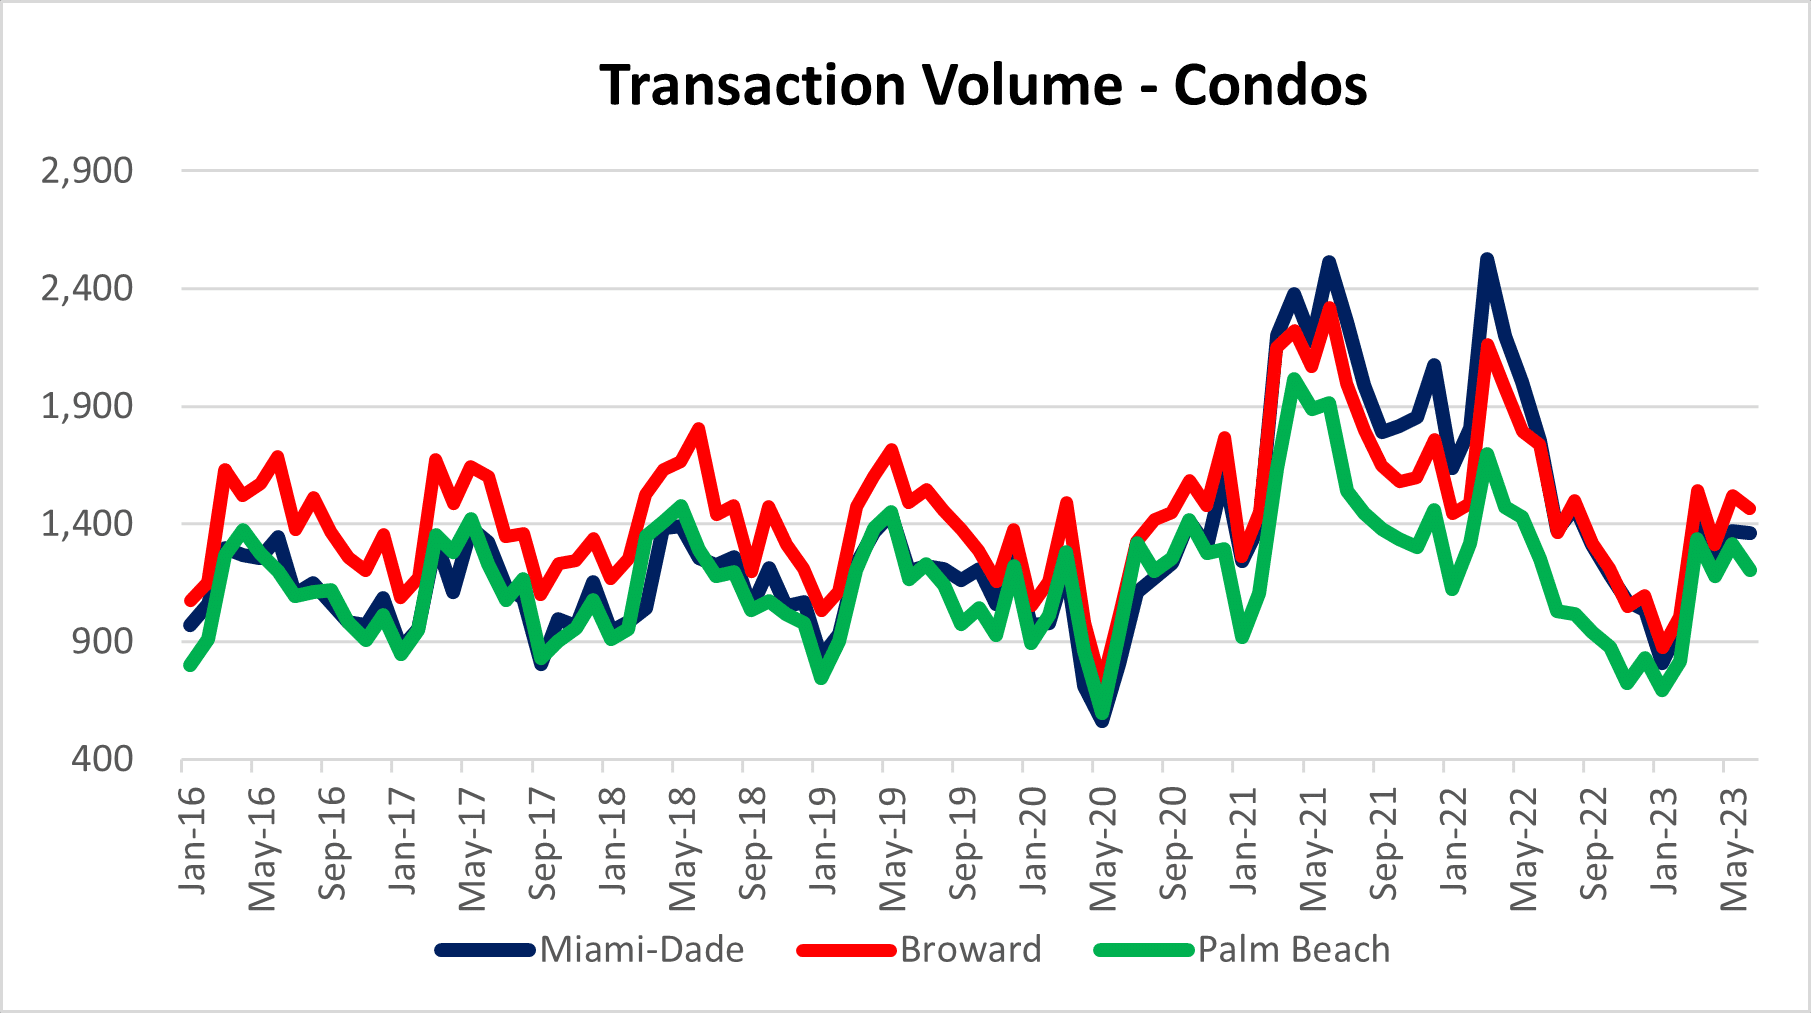 Condo sales in Miami, Fort Lauderdale and Palm Beach Florida